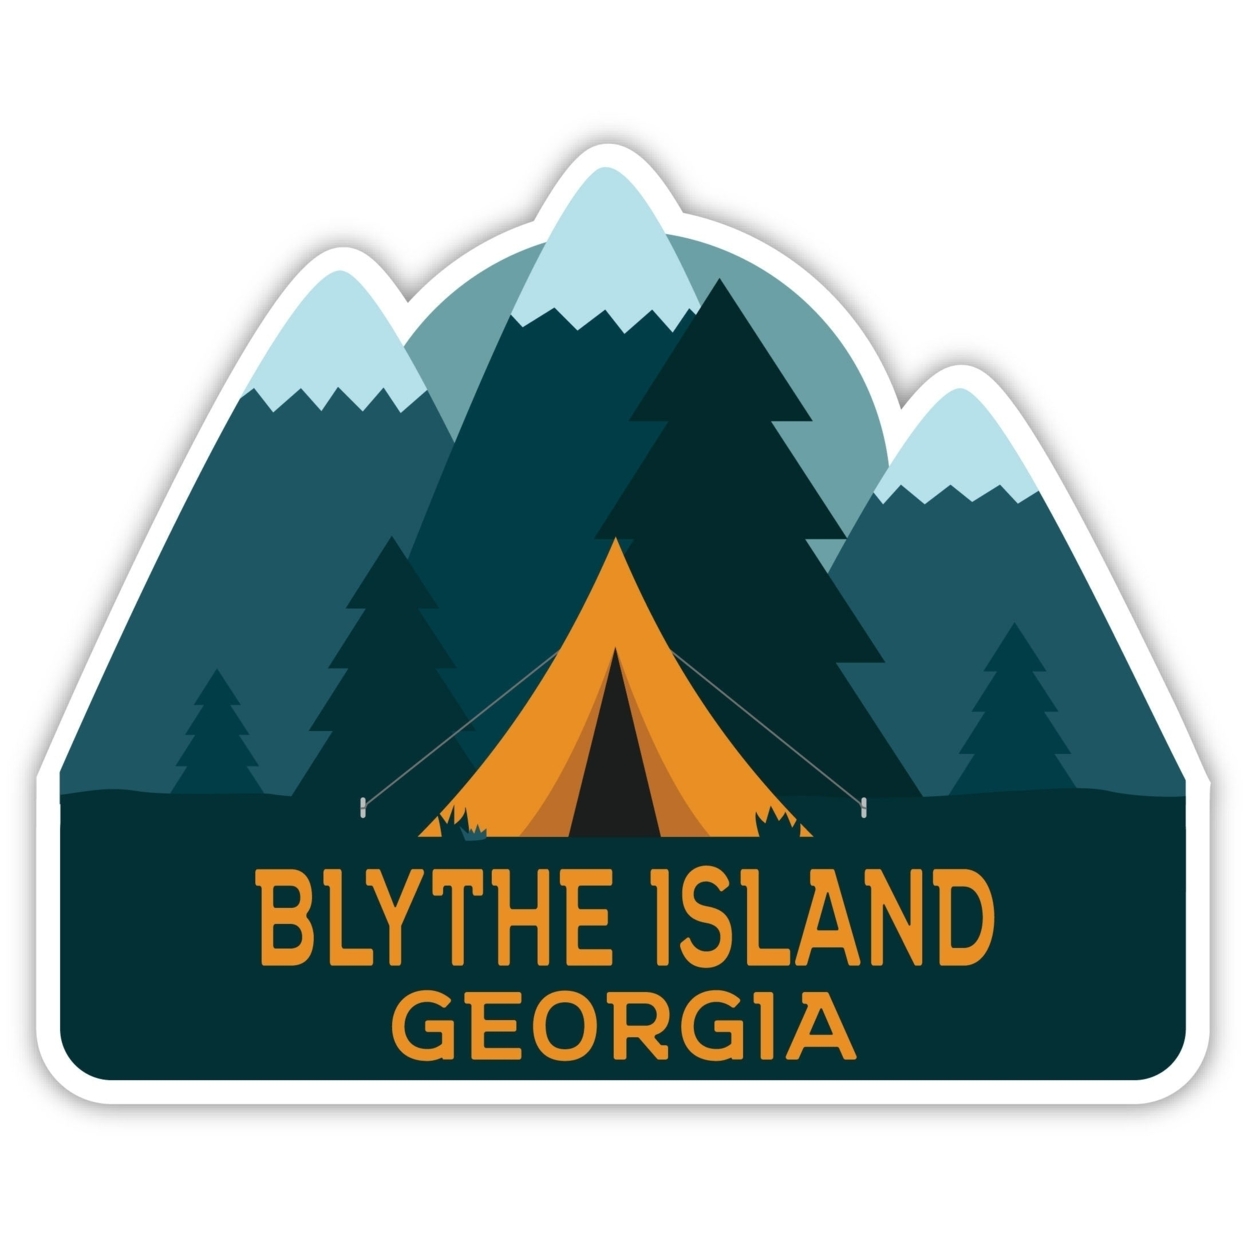 Blythe Island Georgia Souvenir Decorative Stickers (Choose Theme And Size) - Single Unit, 2-Inch, Great Outdoors